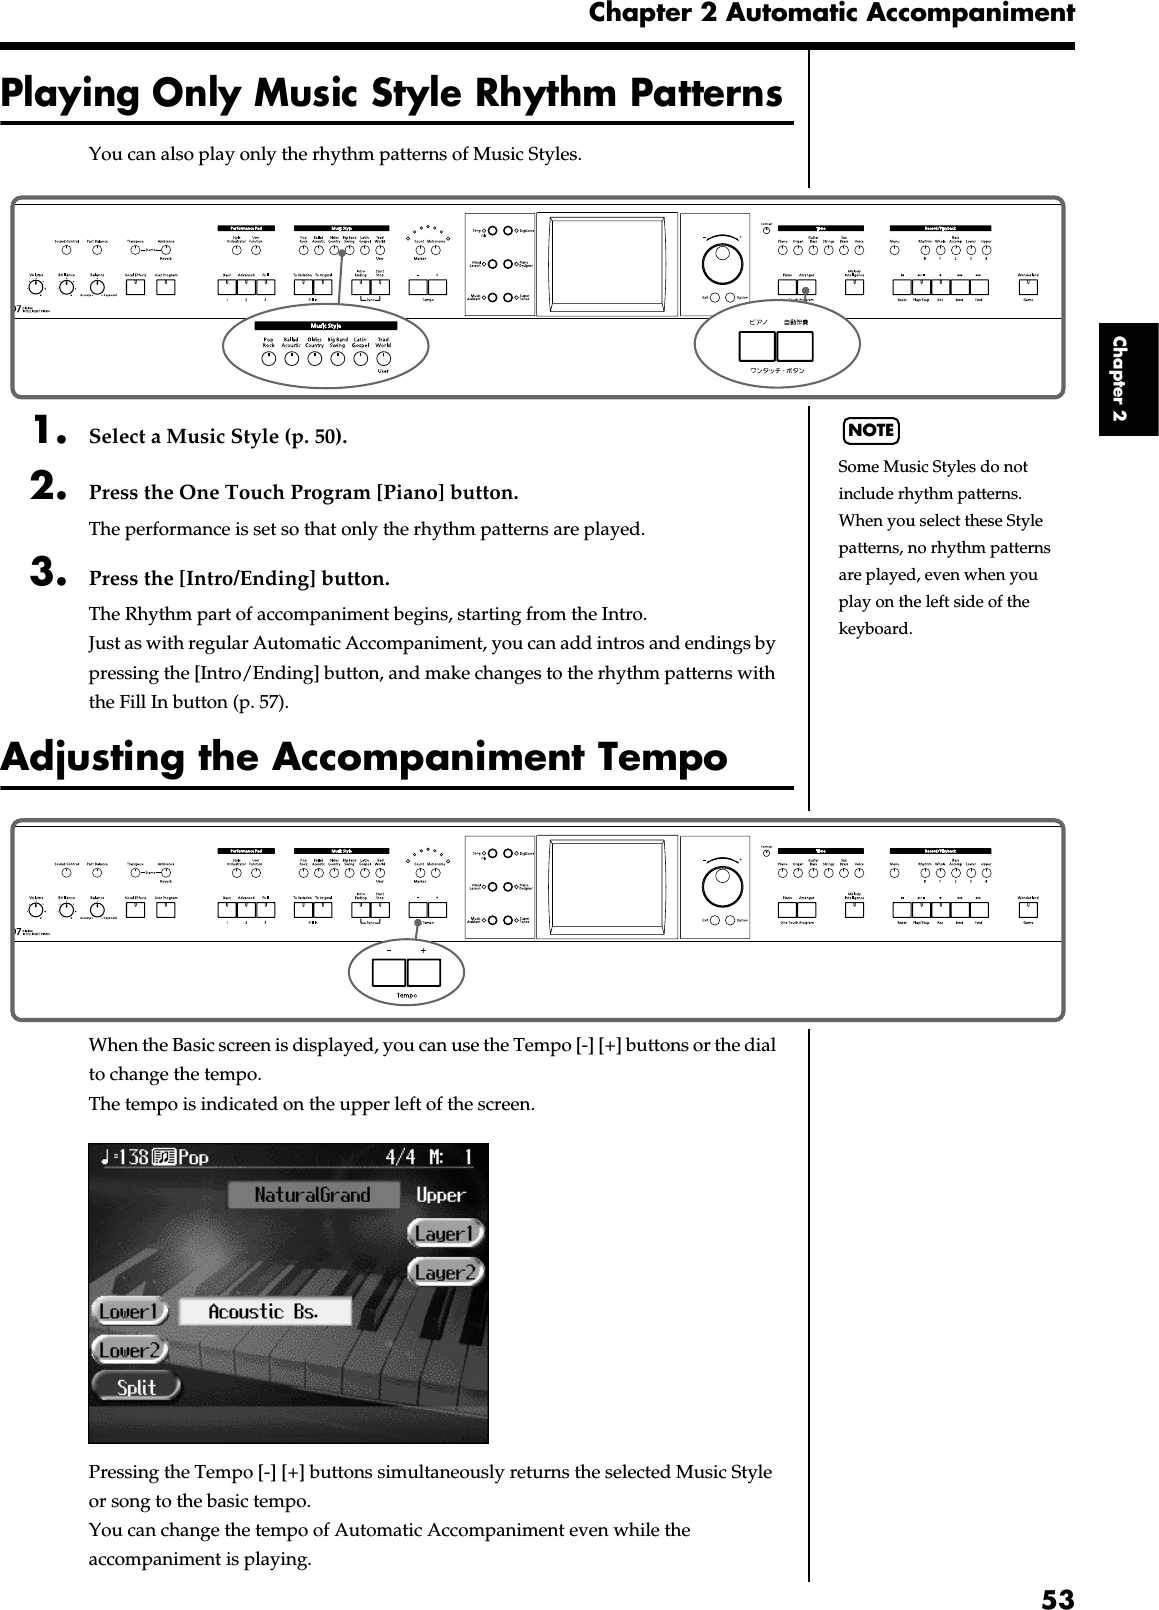 53Chapter 2 Automatic AccompanimentChapter 2Playing Only Music Style Rhythm PatternsYou can also play only the rhythm patterns of Music Styles.fig.panel2-41. Select a Music Style (p. 50).2. Press the One Touch Program [Piano] button.The performance is set so that only the rhythm patterns are played.3. Press the [Intro/Ending] button.The Rhythm part of accompaniment begins, starting from the Intro.Just as with regular Automatic Accompaniment, you can add intros and endings by pressing the [Intro/Ending] button, and make changes to the rhythm patterns with the Fill In button (p. 57).Adjusting the Accompaniment Tempofig.panel2-5When the Basic screen is displayed, you can use the Tempo [-] [+] buttons or the dial to change the tempo.The tempo is indicated on the upper left of the screen.fig.d-arrbasic.eps_60Pressing the Tempo [-] [+] buttons simultaneously returns the selected Music Style or song to the basic tempo.You can change the tempo of Automatic Accompaniment even while the accompaniment is playing. NOTESome Music Styles do not include rhythm patterns. When you select these Style patterns, no rhythm patterns are played, even when you play on the left side of the keyboard.